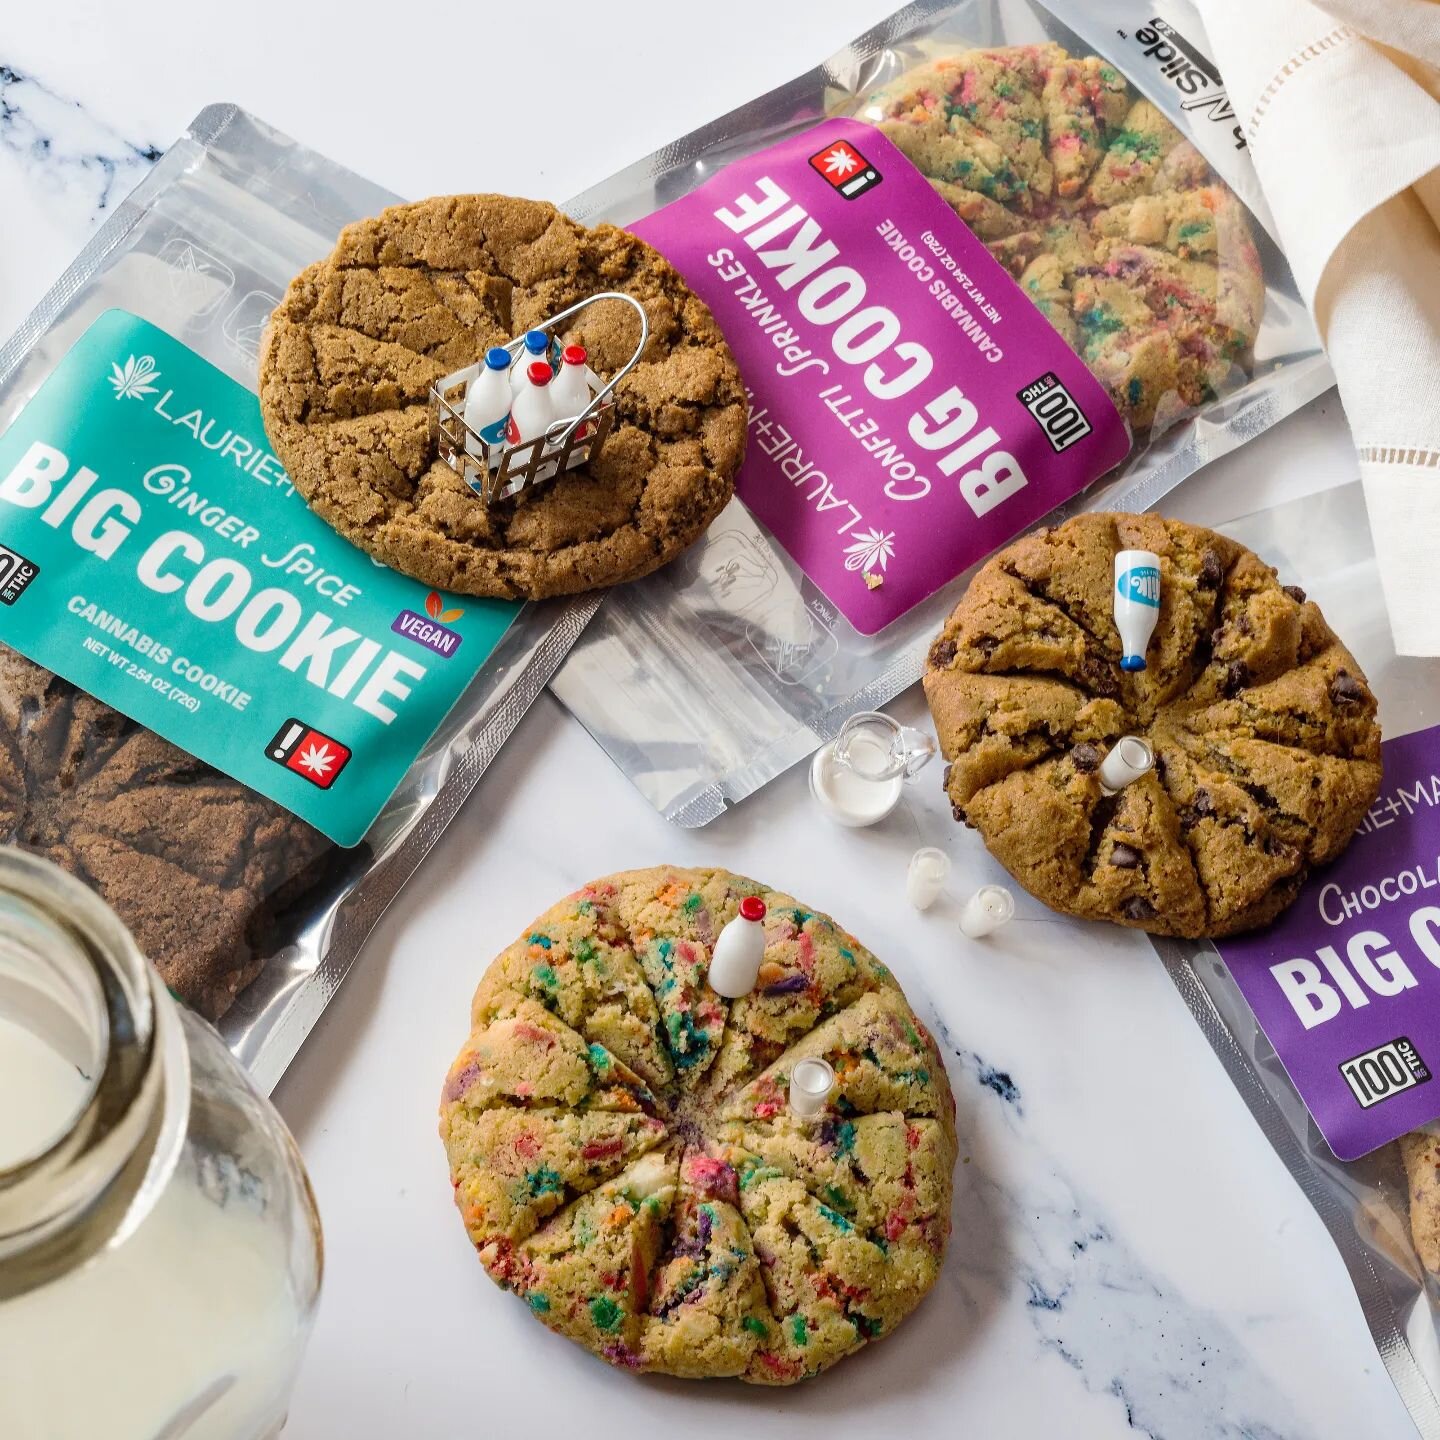 Laurie + MaryJane&rsquo;s best-selling cookies are now available at 100 mg 🌿 in one BIG COOKIE! Everyone knows a BIGGER cookies means a BETTER cookie, so we made the same great cookies at double the size and double the potency. Like all signature La